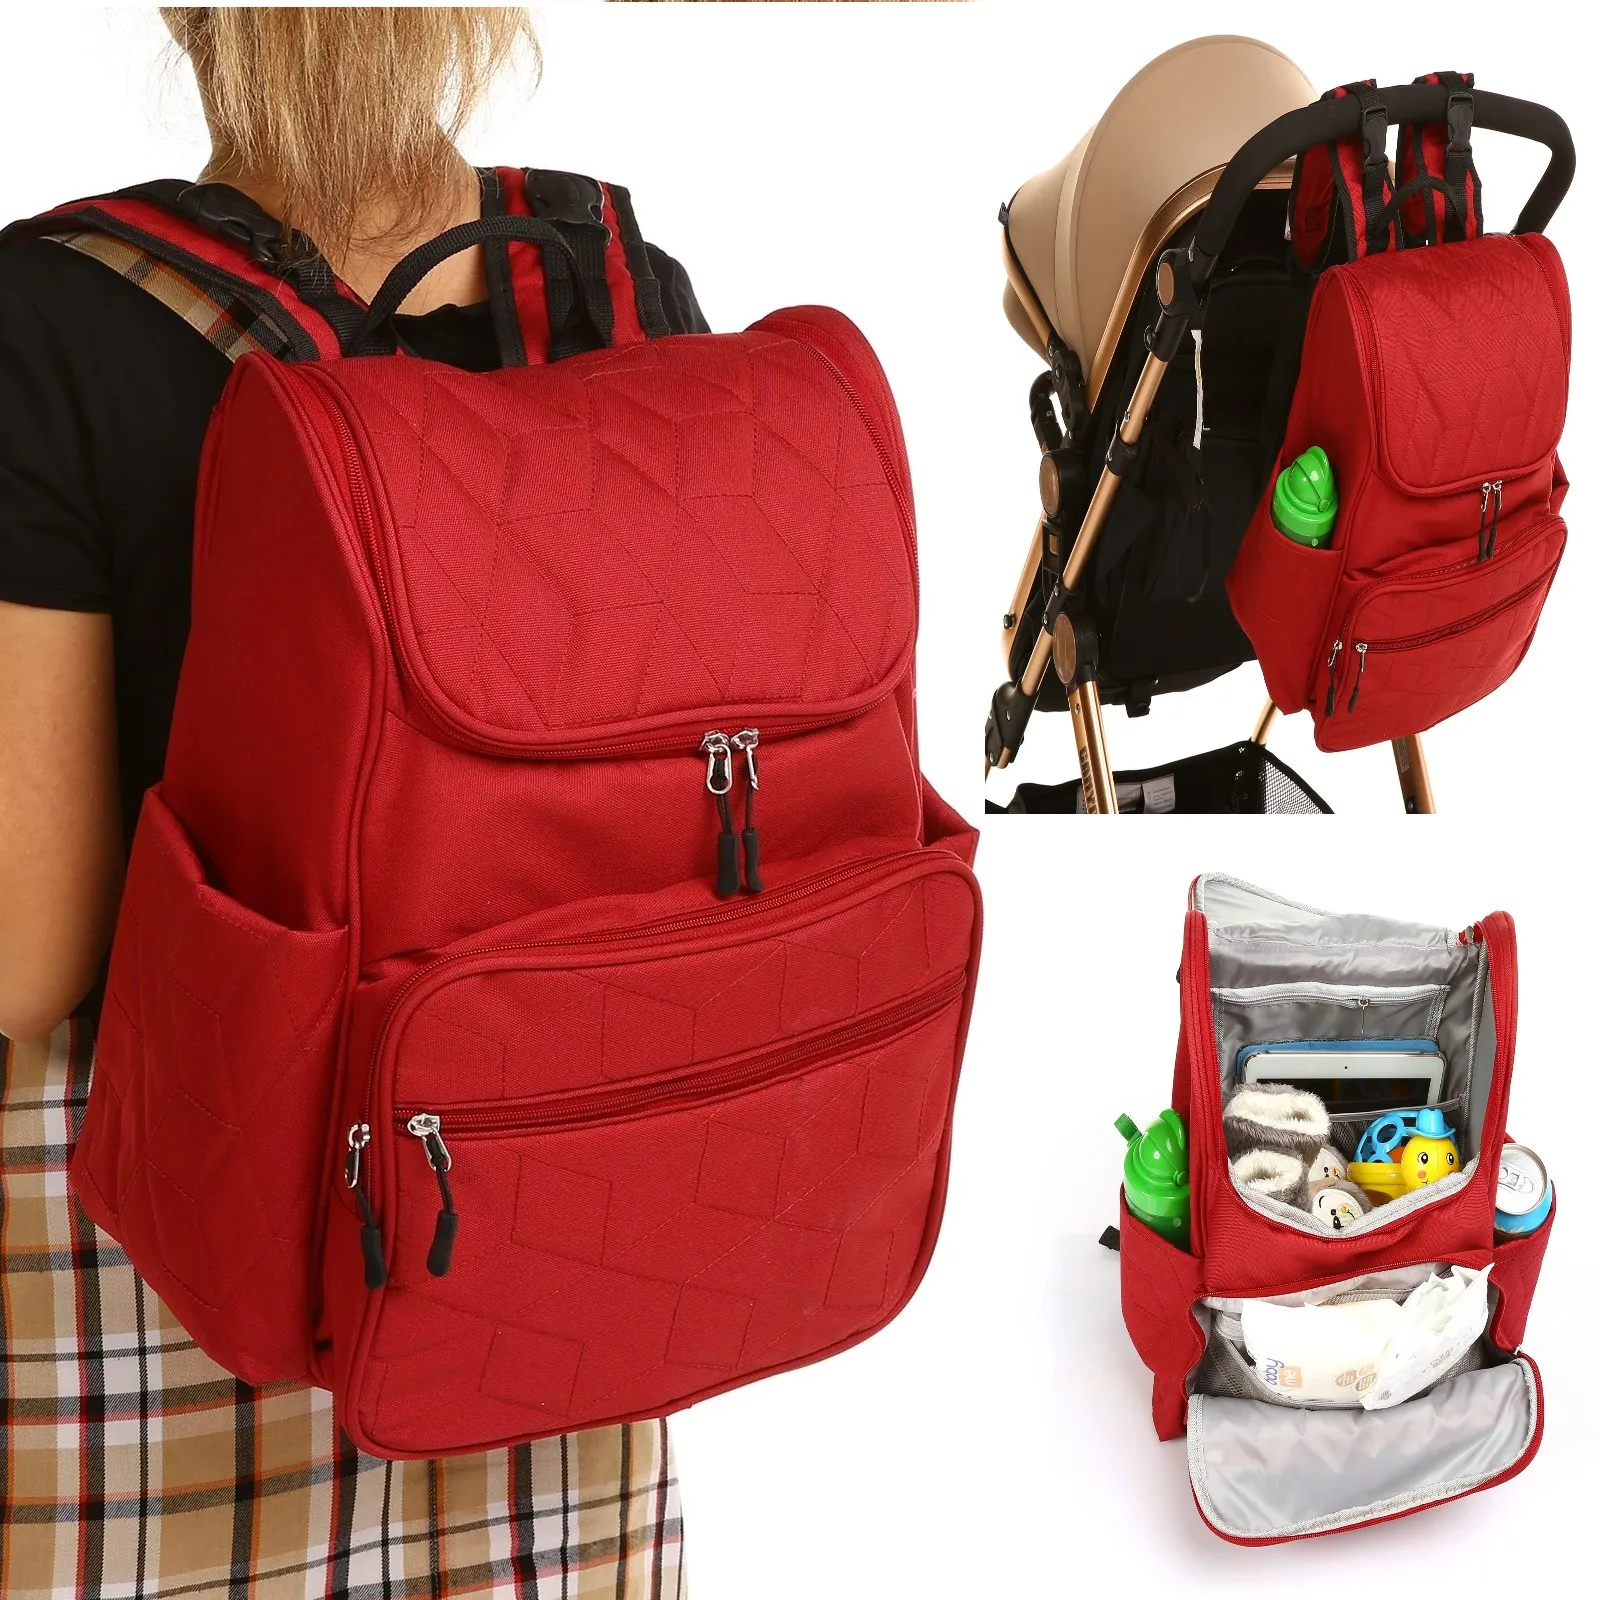 

Baby diaper bags Multifunctional bag Backpack baby bag backpack Storage Large size for Mommy new born baby items baby mom Waterproof Large volume plate carrier Travel Fashion Mummy baby accessories baby products